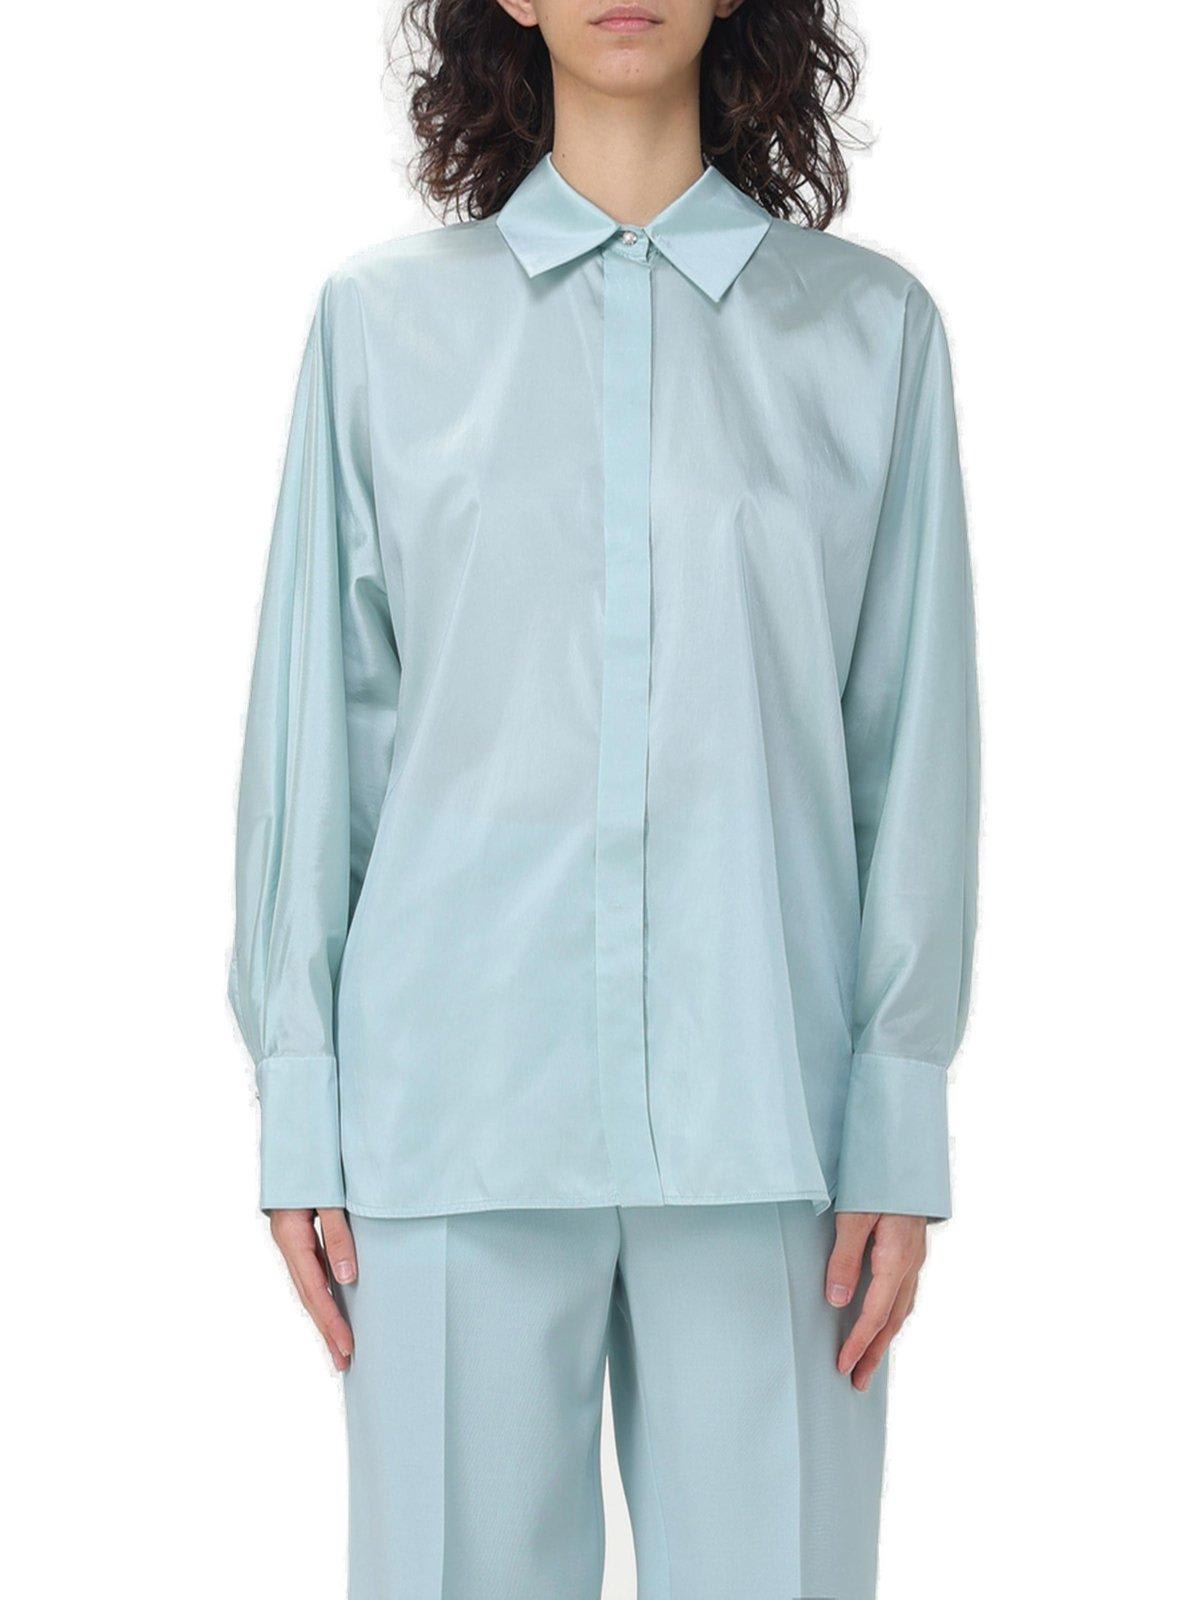 Clan Buttoned Long-sleeved Top Max Mara Studio